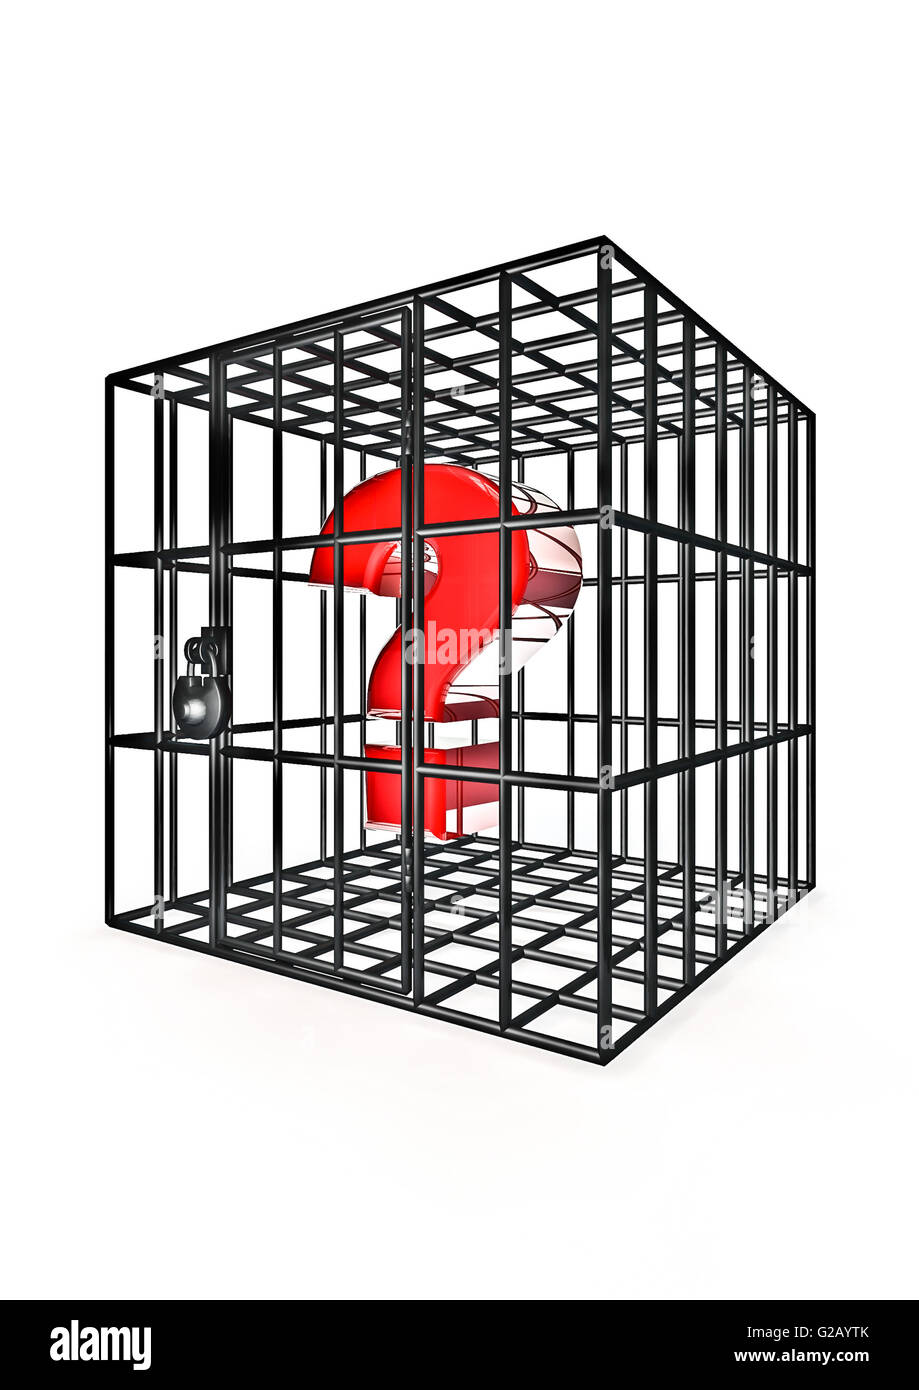 Caged question / 3D render of question mark symbol in metal cage Stock Photo